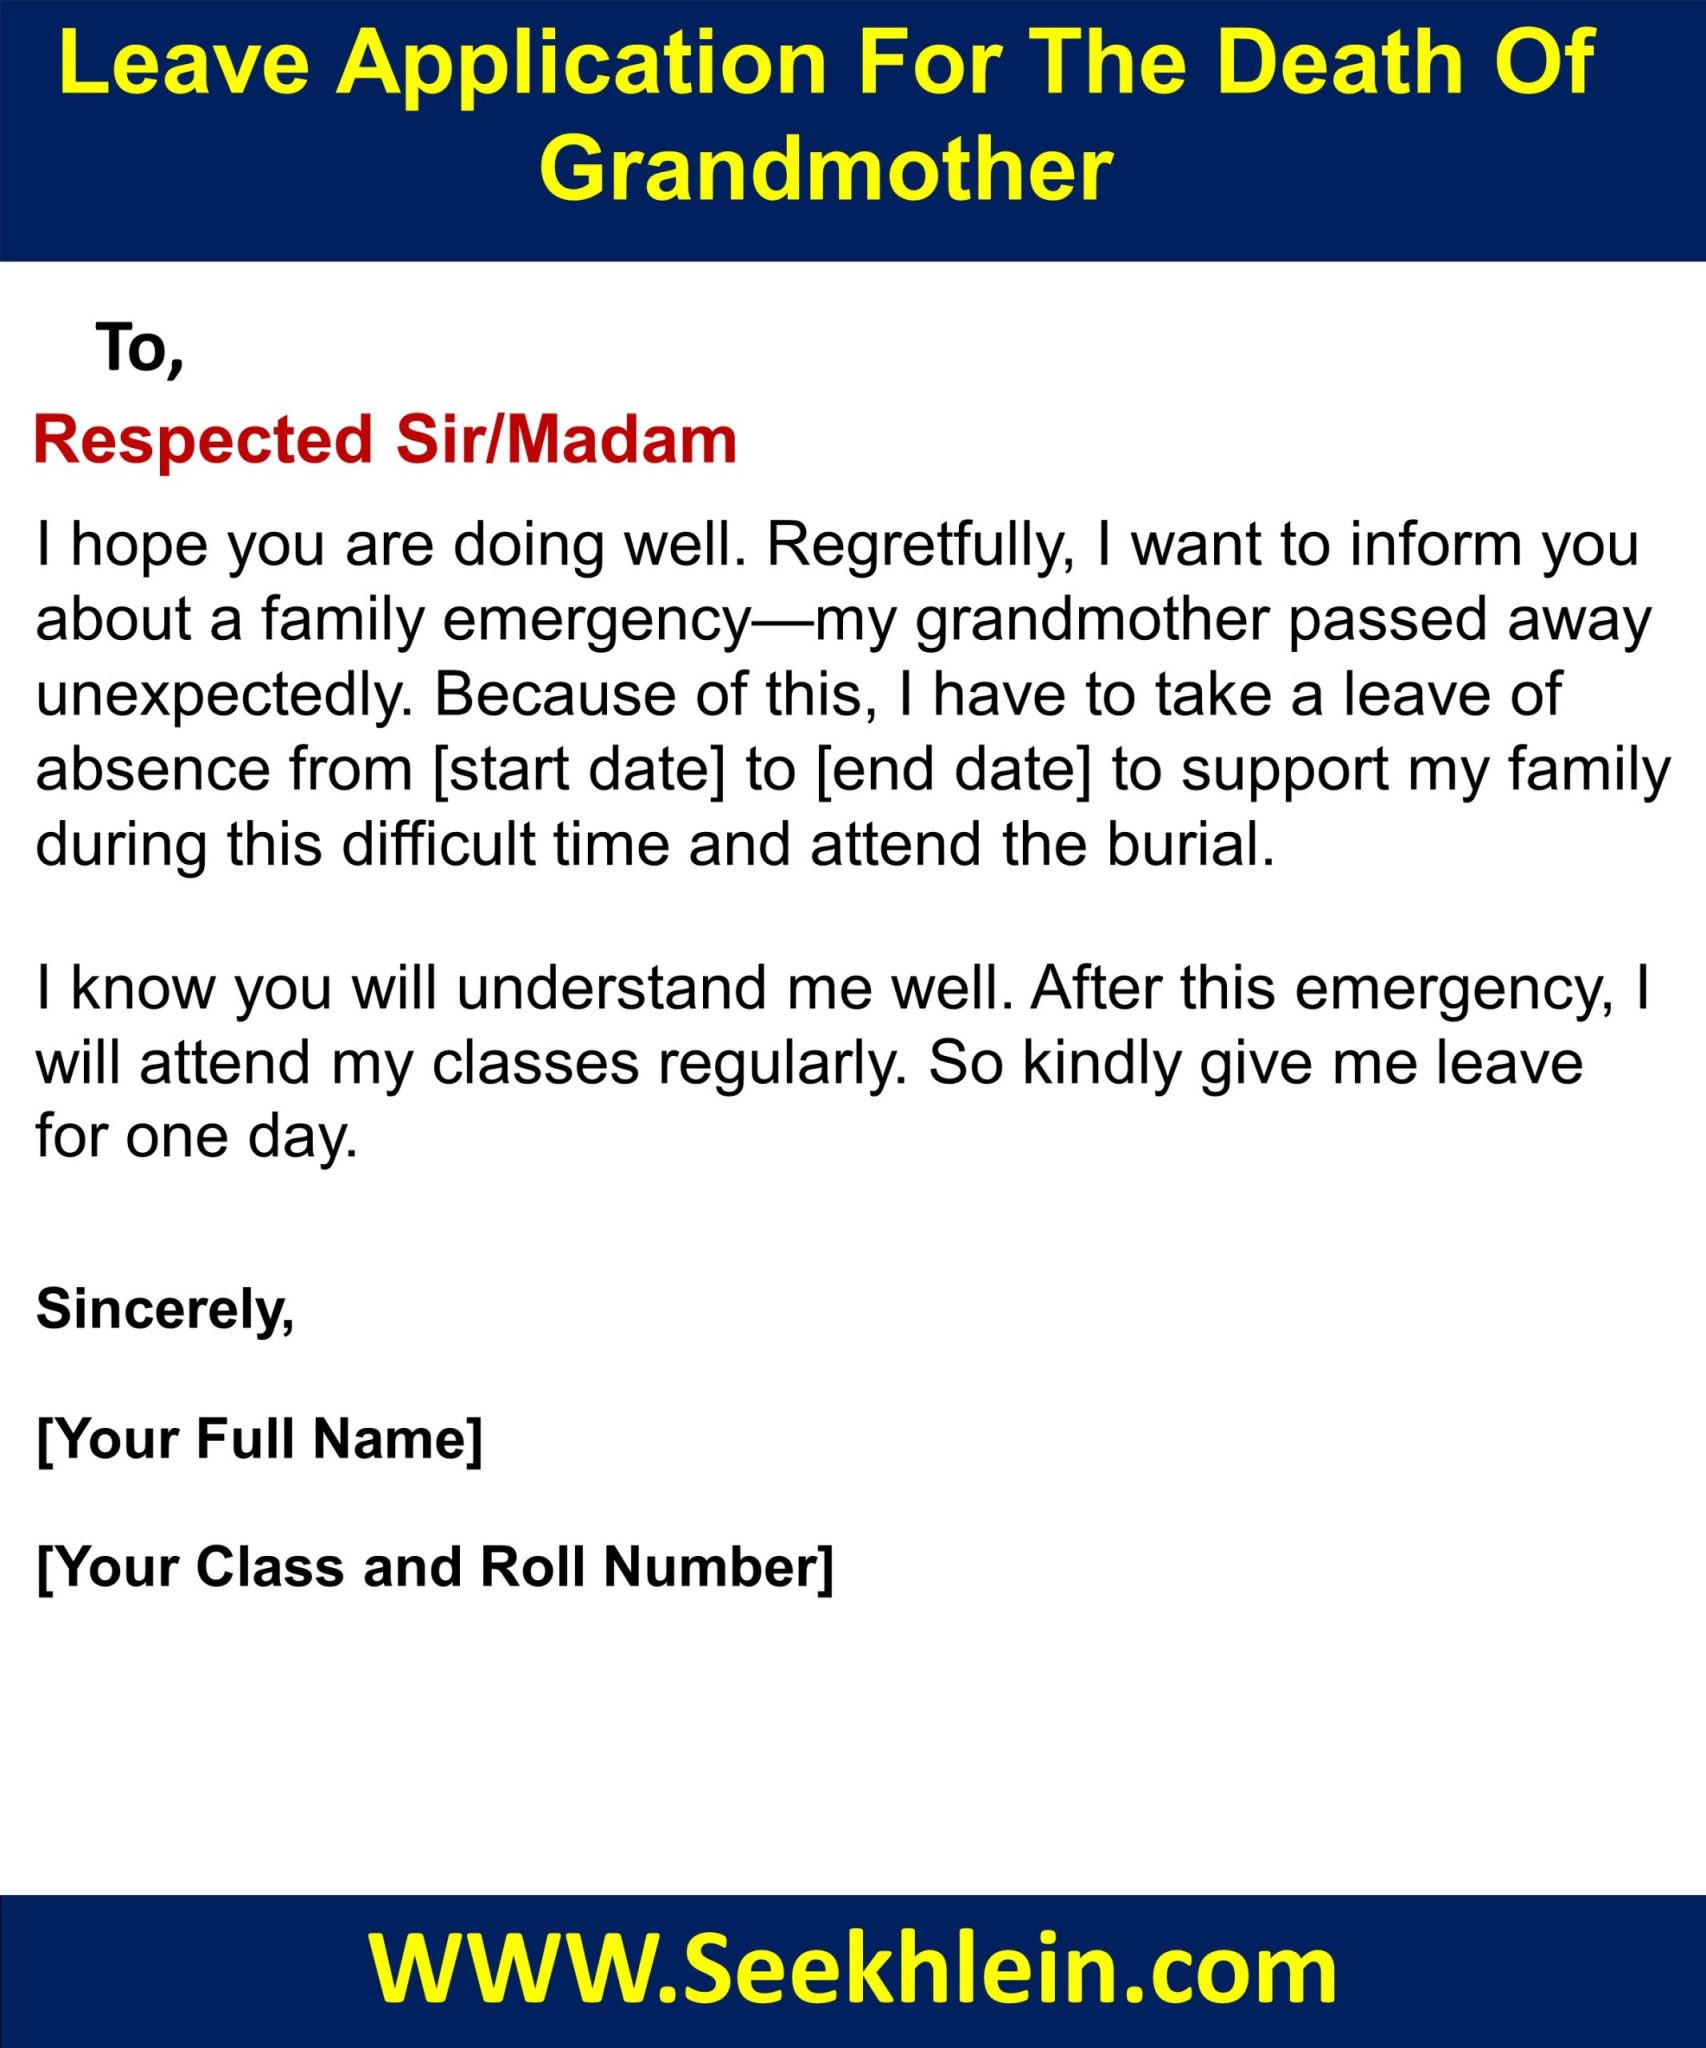 Emergency Leave Application For Grandmother's Death